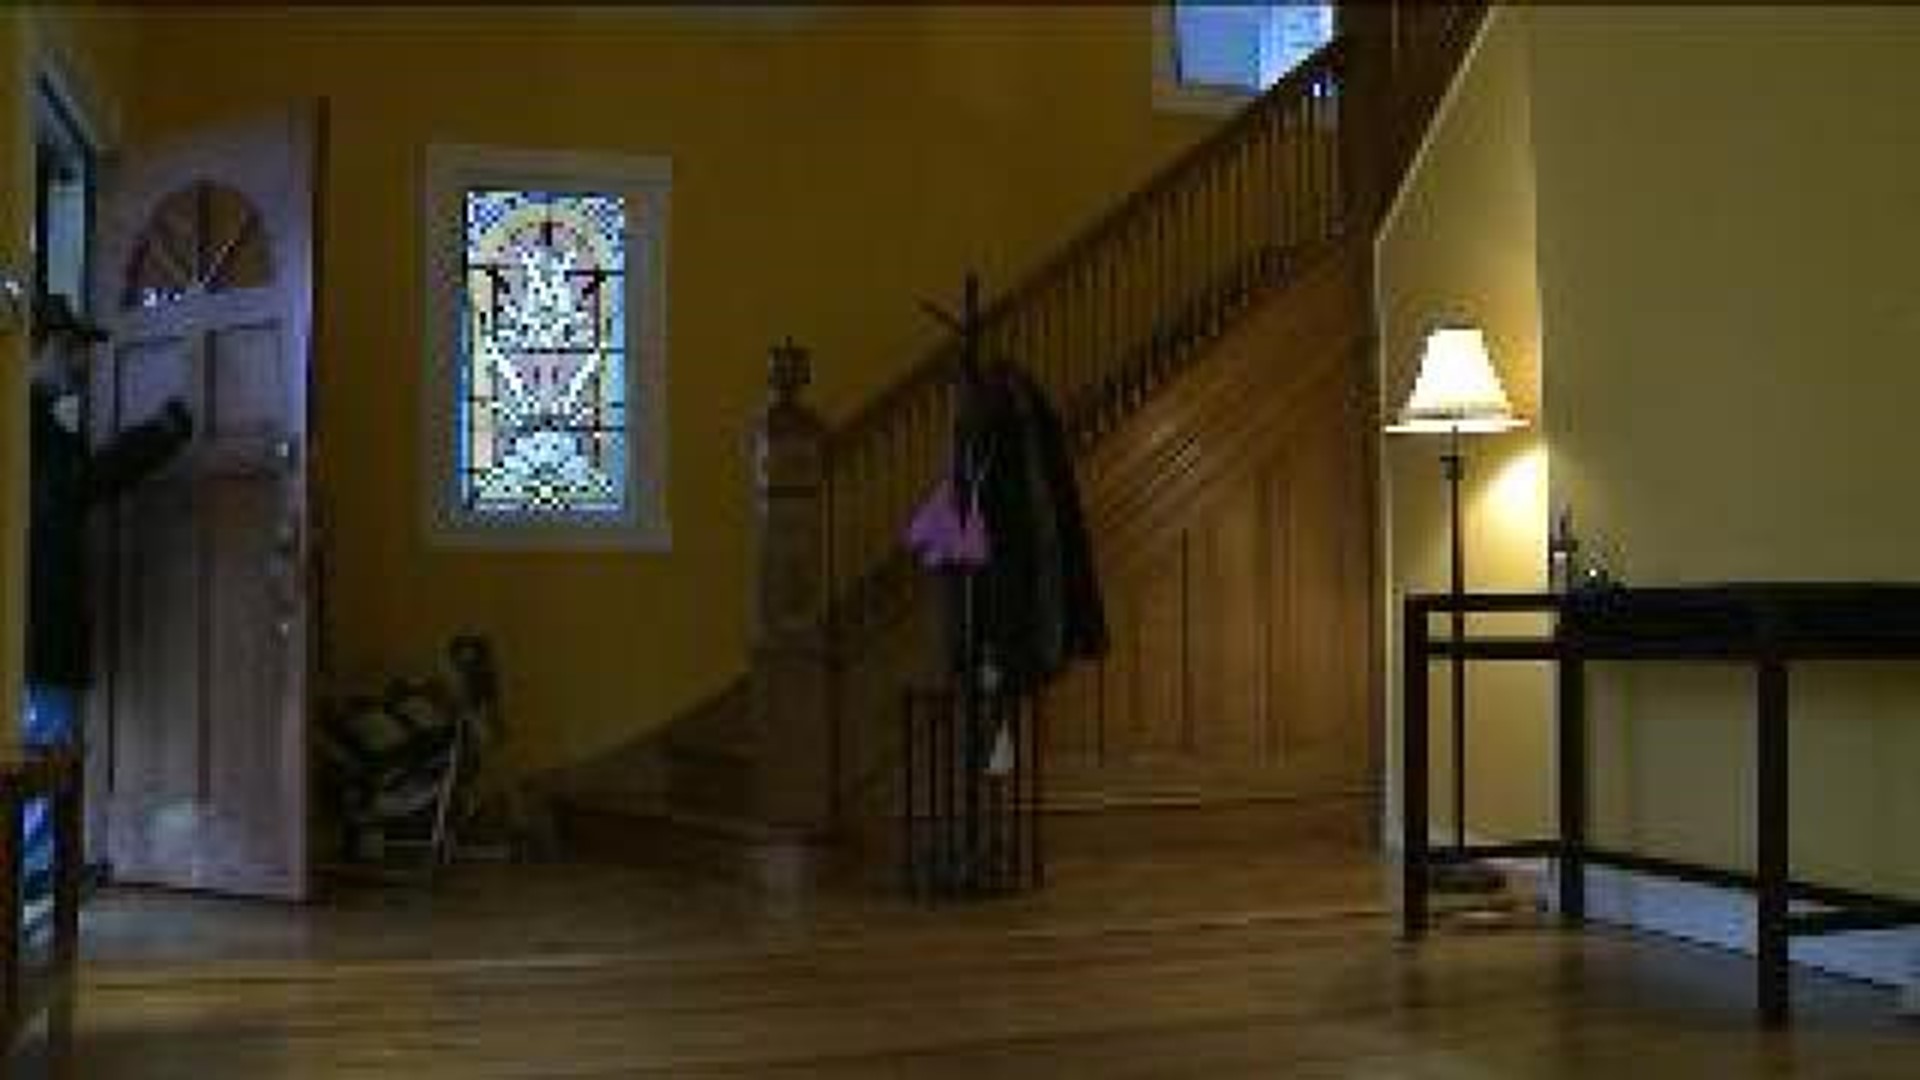 Owner Claims House is Slightly Haunted